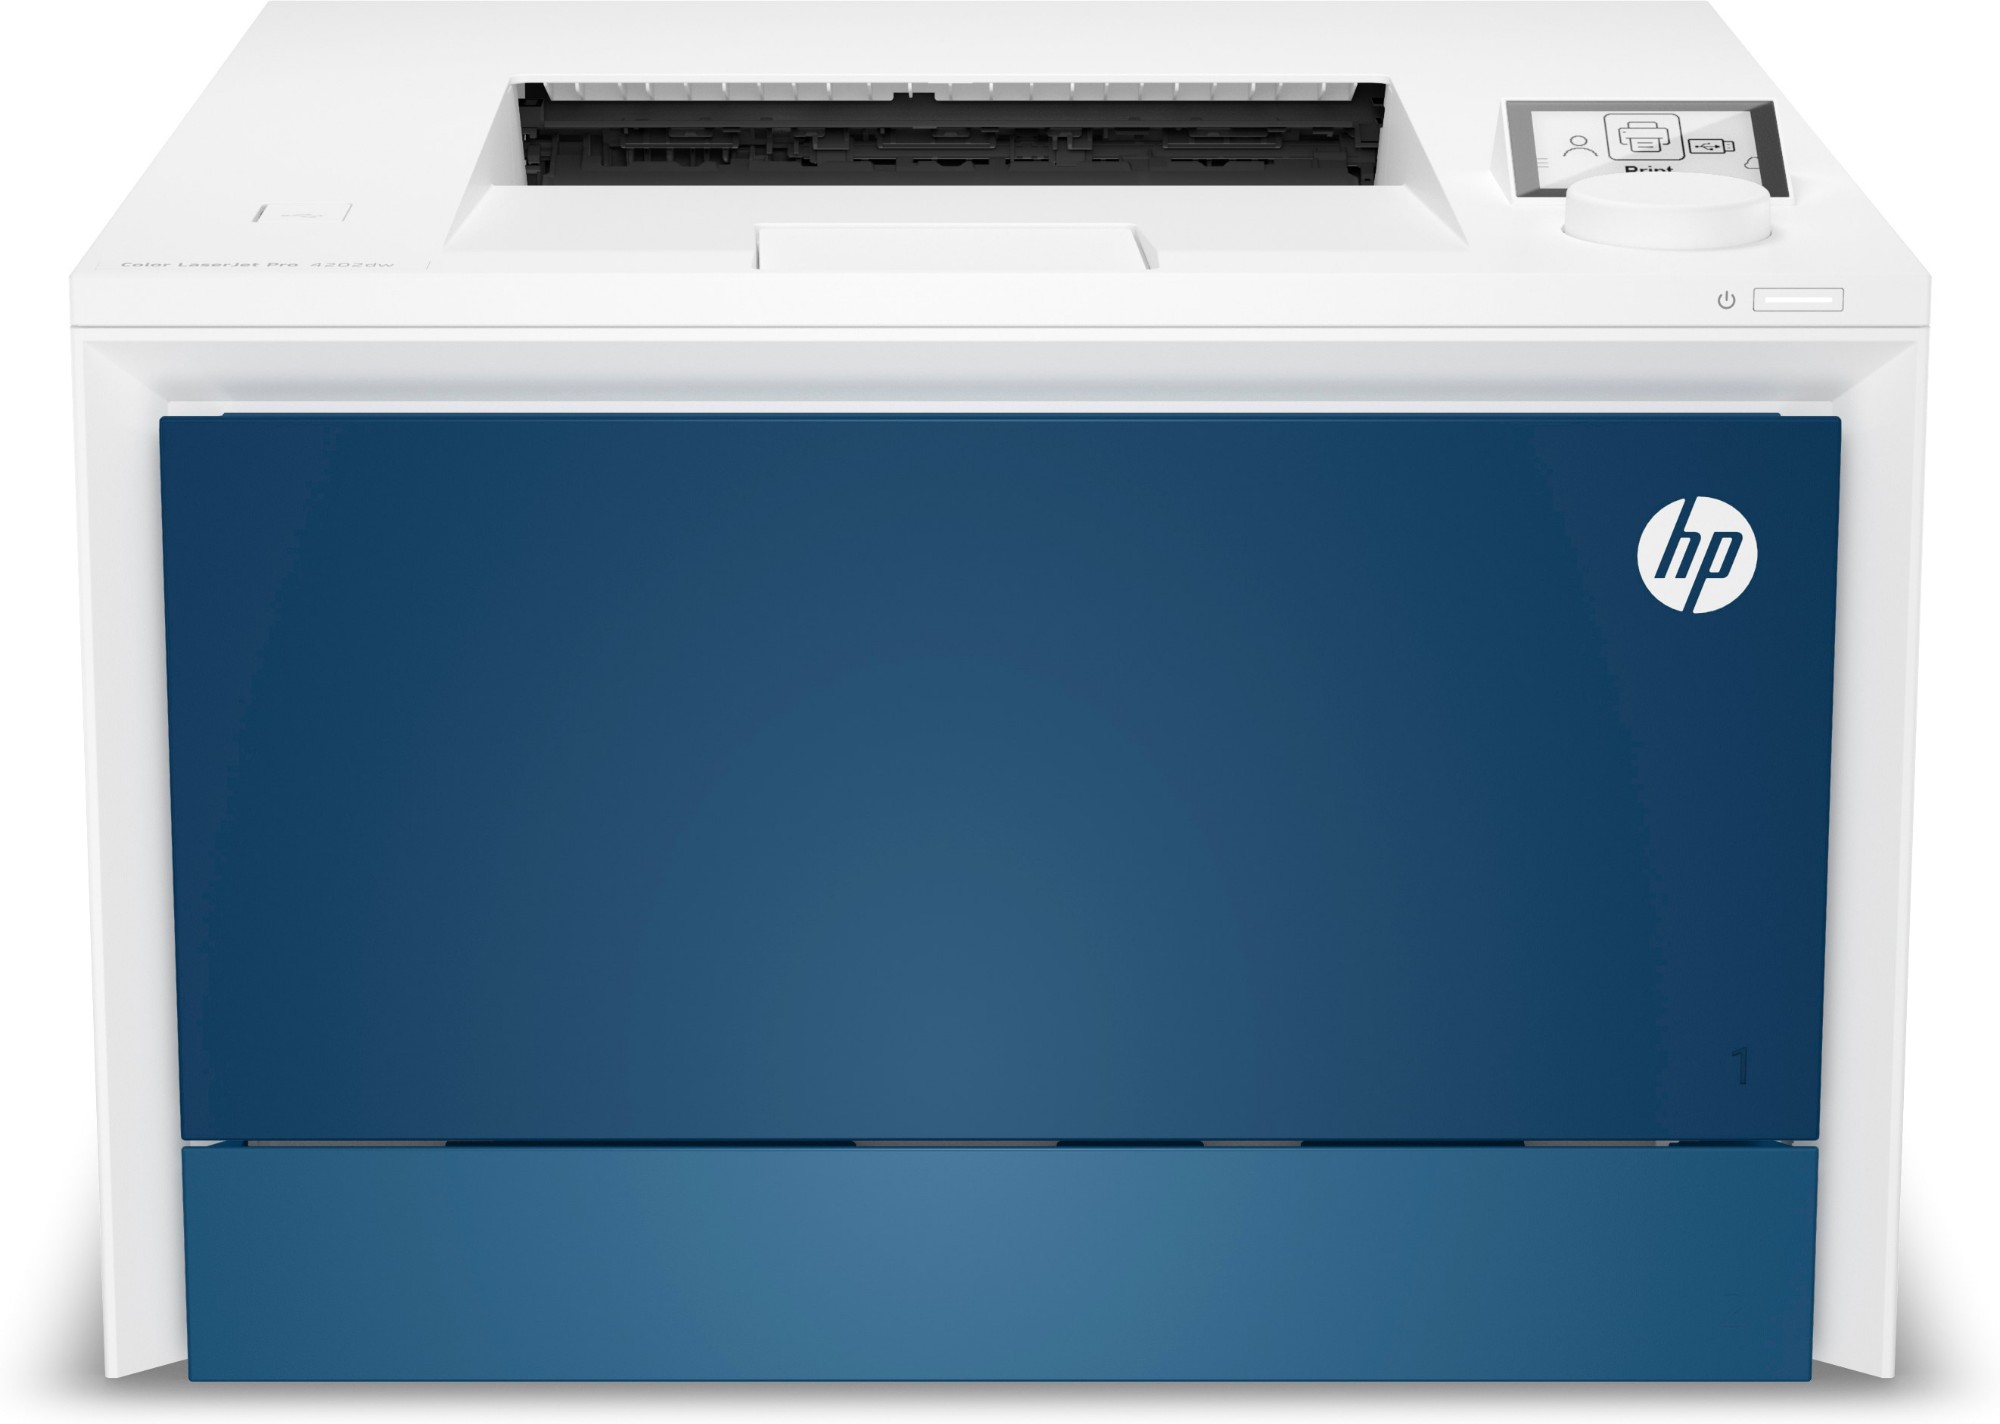 HP Colour LaserJet Pro 4202dw Printer, Colour, Printer for Small medium business, Print, Wireless; Print from phone or tablet; Two-sided printing